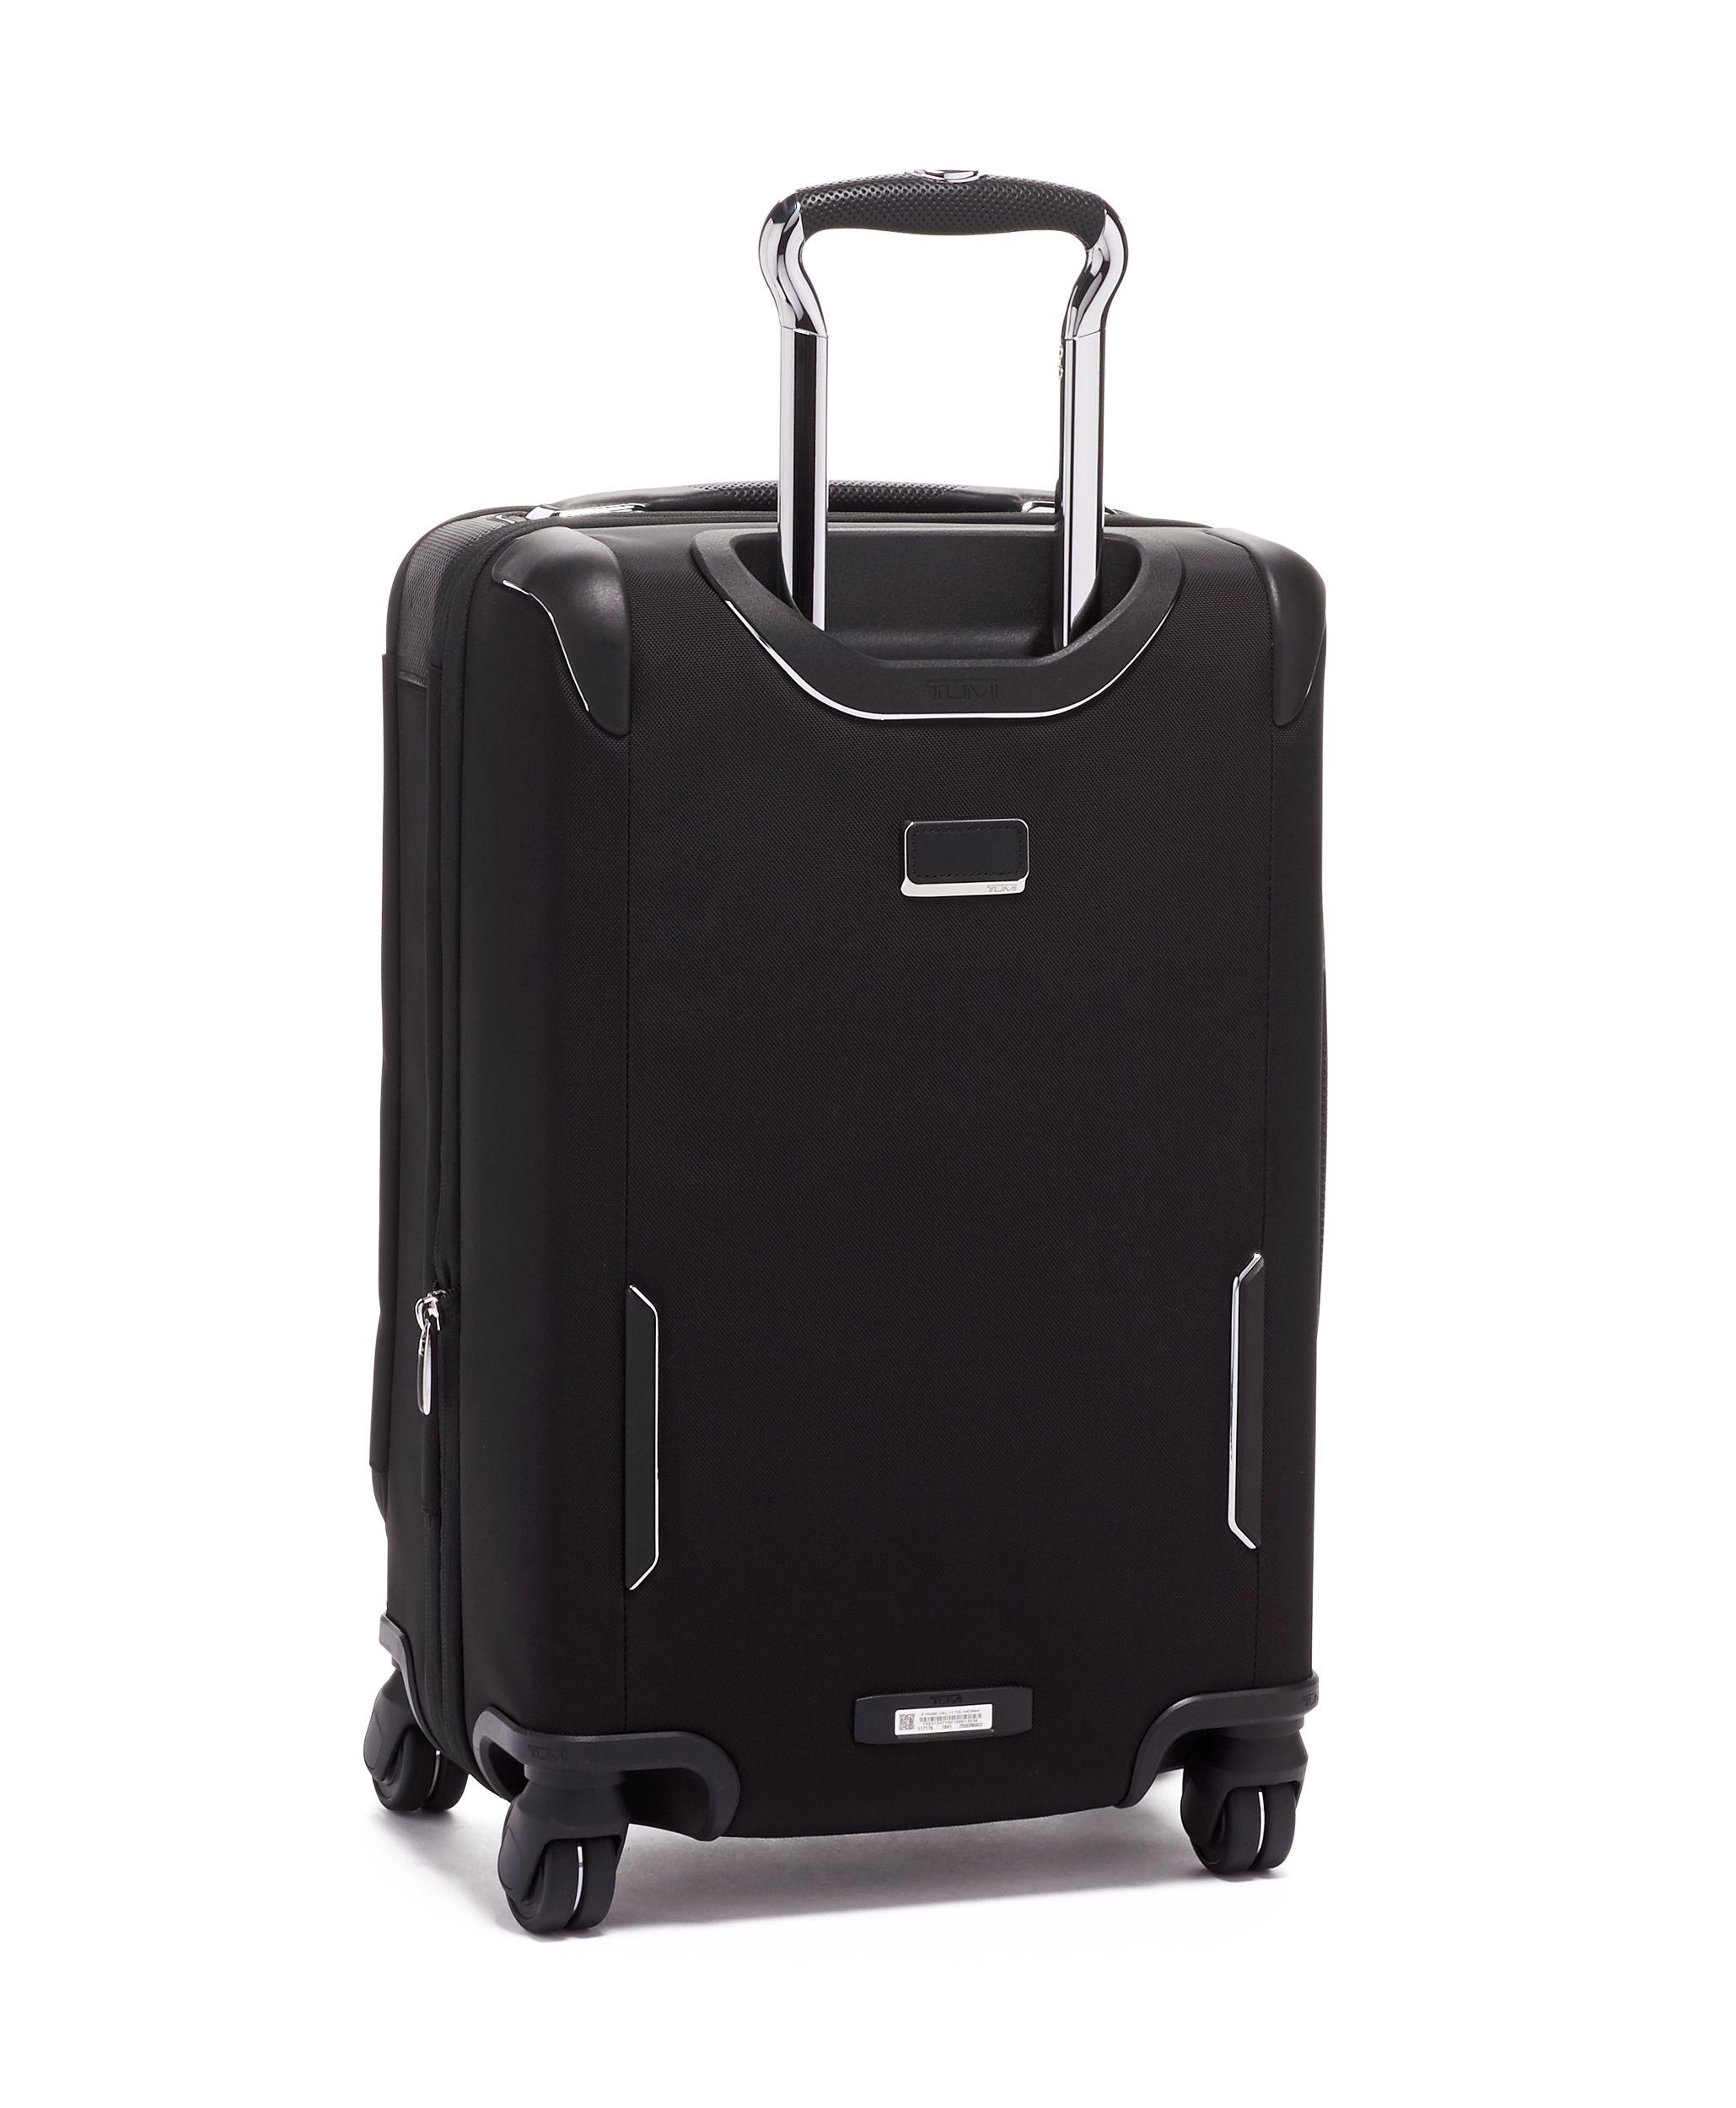 Buy International Dual Access 4 Wheeled (Carry-On-Luggage) Bag Online ...